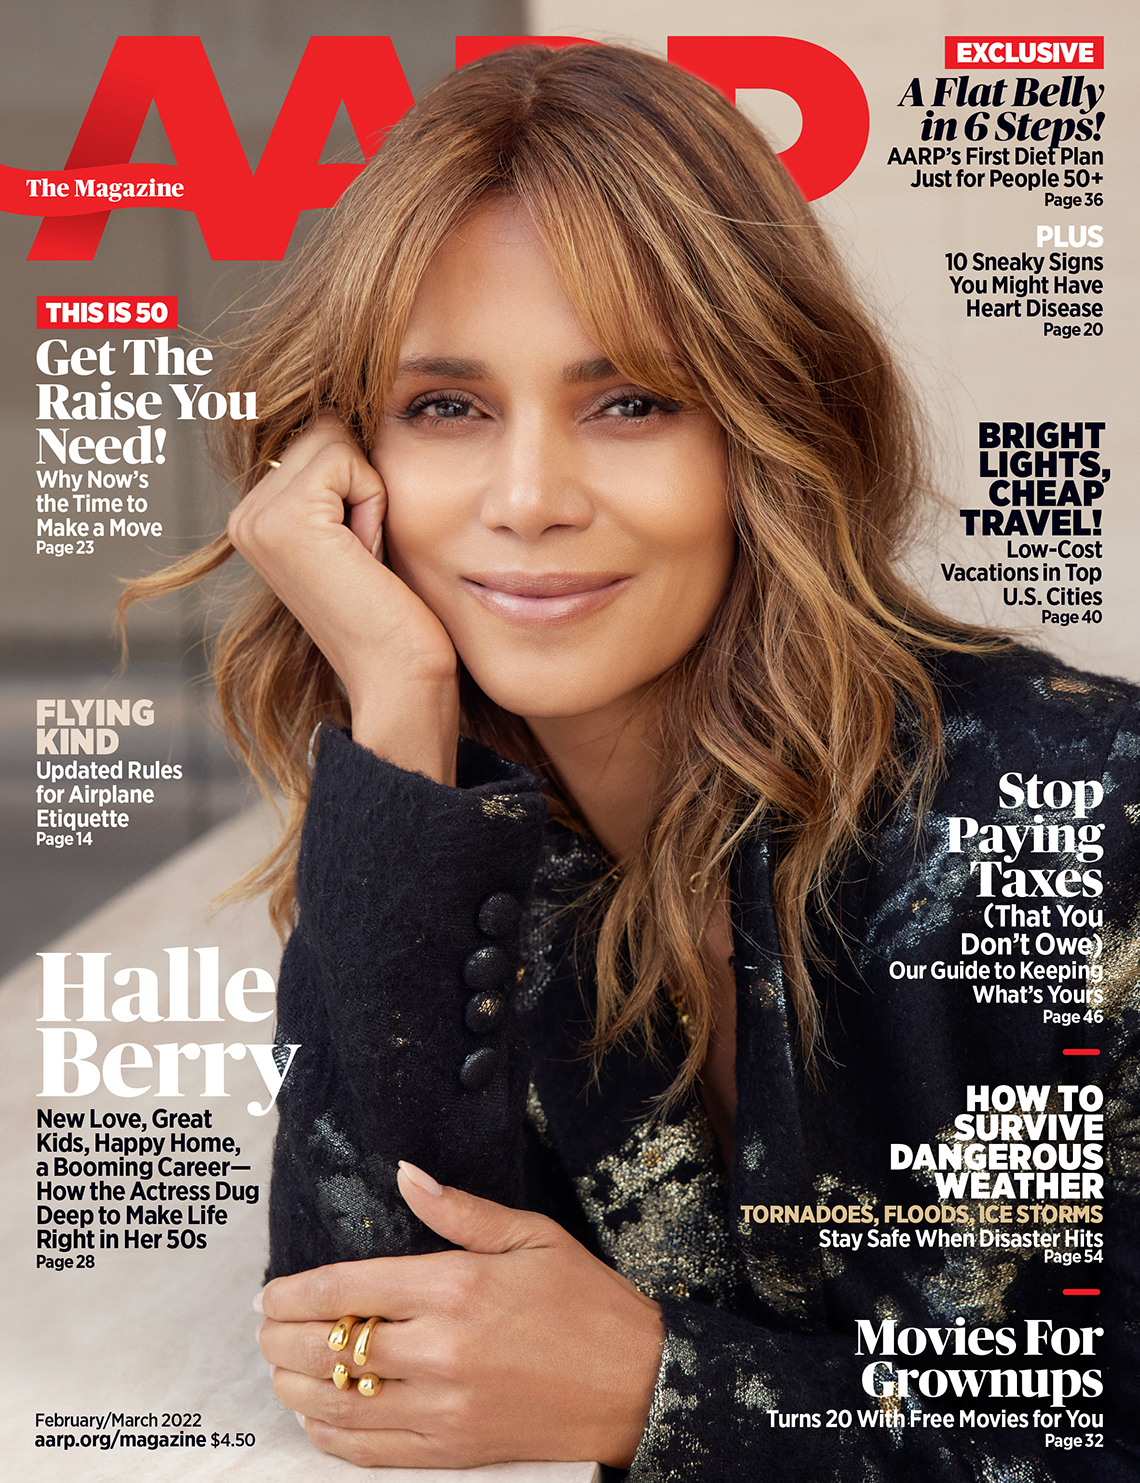 cover of a a r p the magazine feb-mar 2022 with Halle Berry